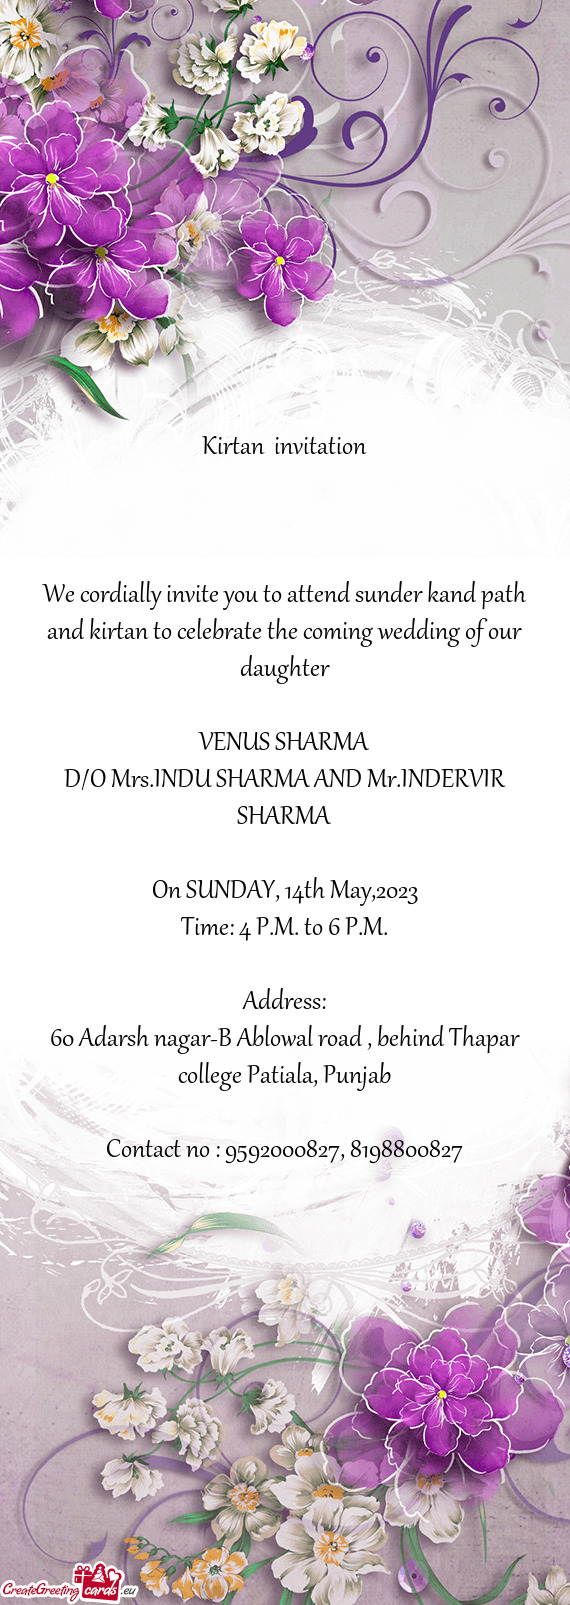 We cordially invite you to attend sunder kand path and kirtan to celebrate the coming wedding of our